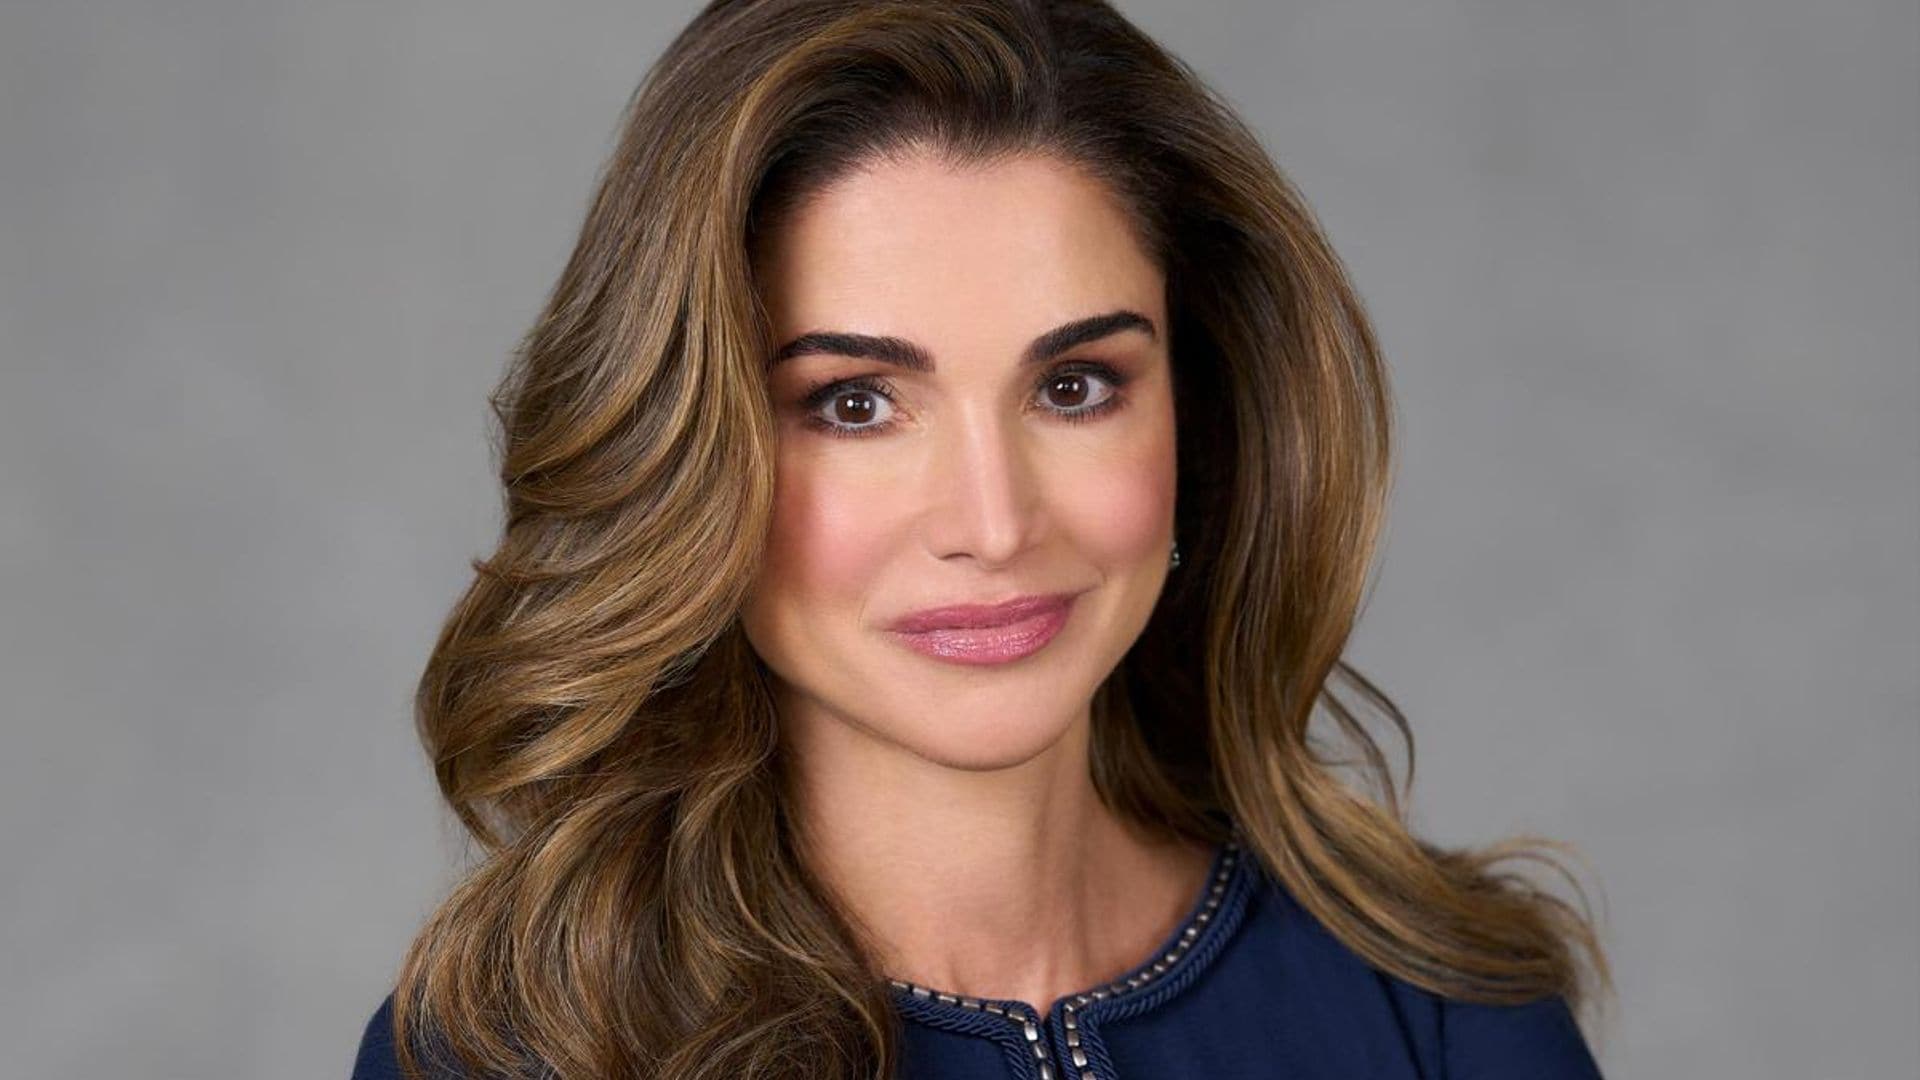 Queen Rania surprised ahead of birthday: See photo of her 'lovely surprise'